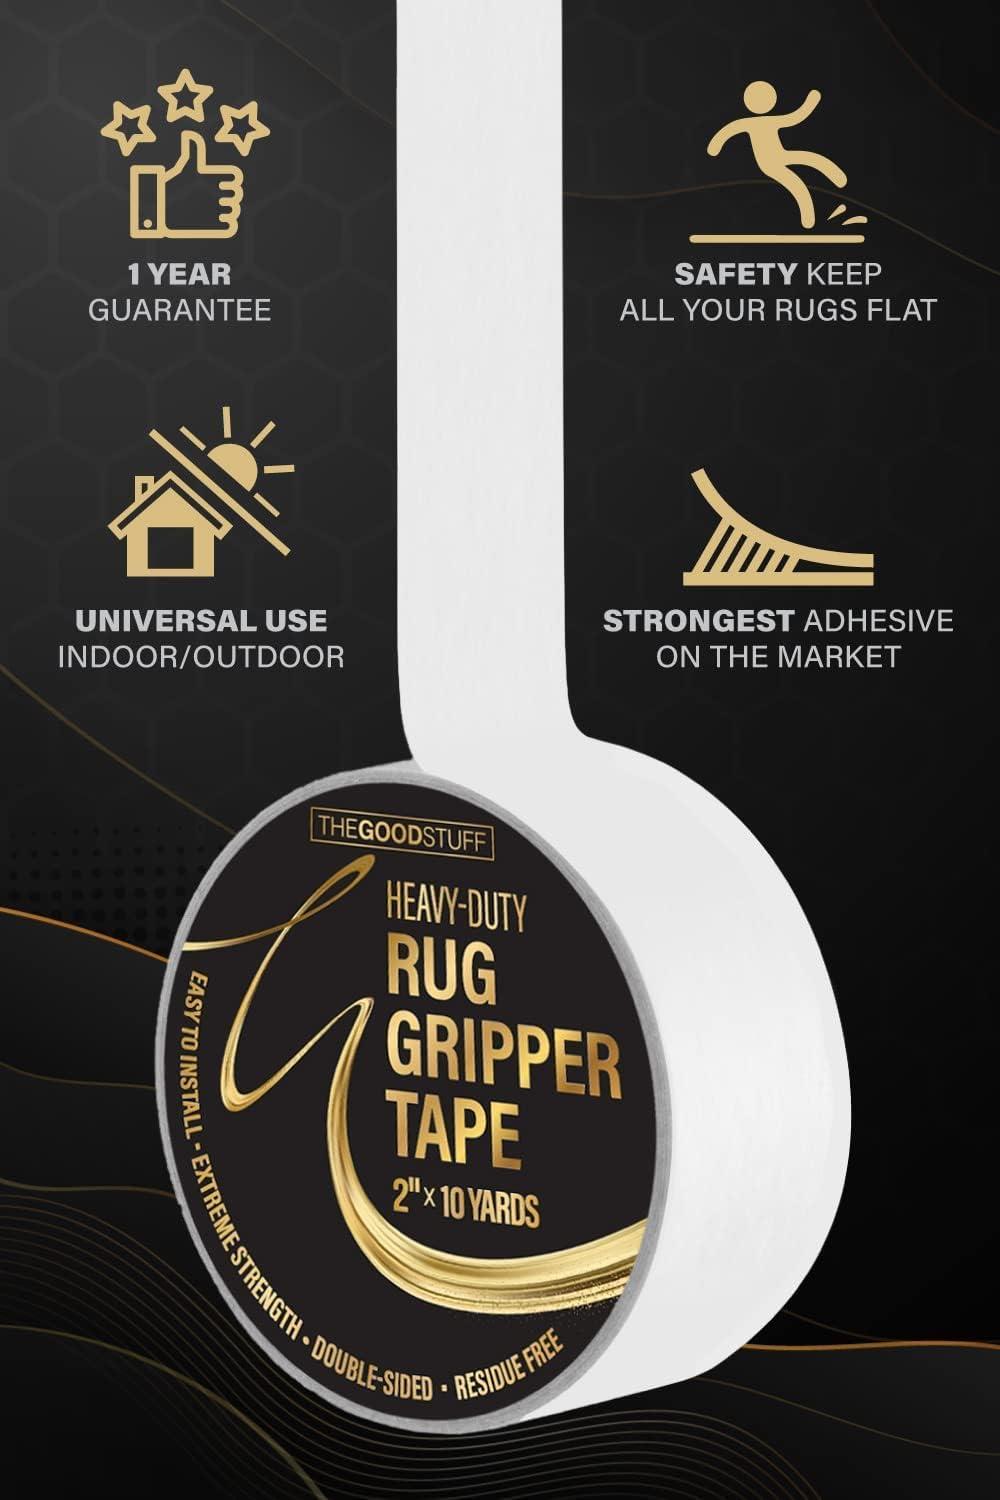 Heavy Duty Double Sided Rug Tape for Area Rugs on Hardwood Floors and Carpet, Secure Rugs with Strong 2 Sided Carpet Tape for Wood Floors (2 x 75ft)